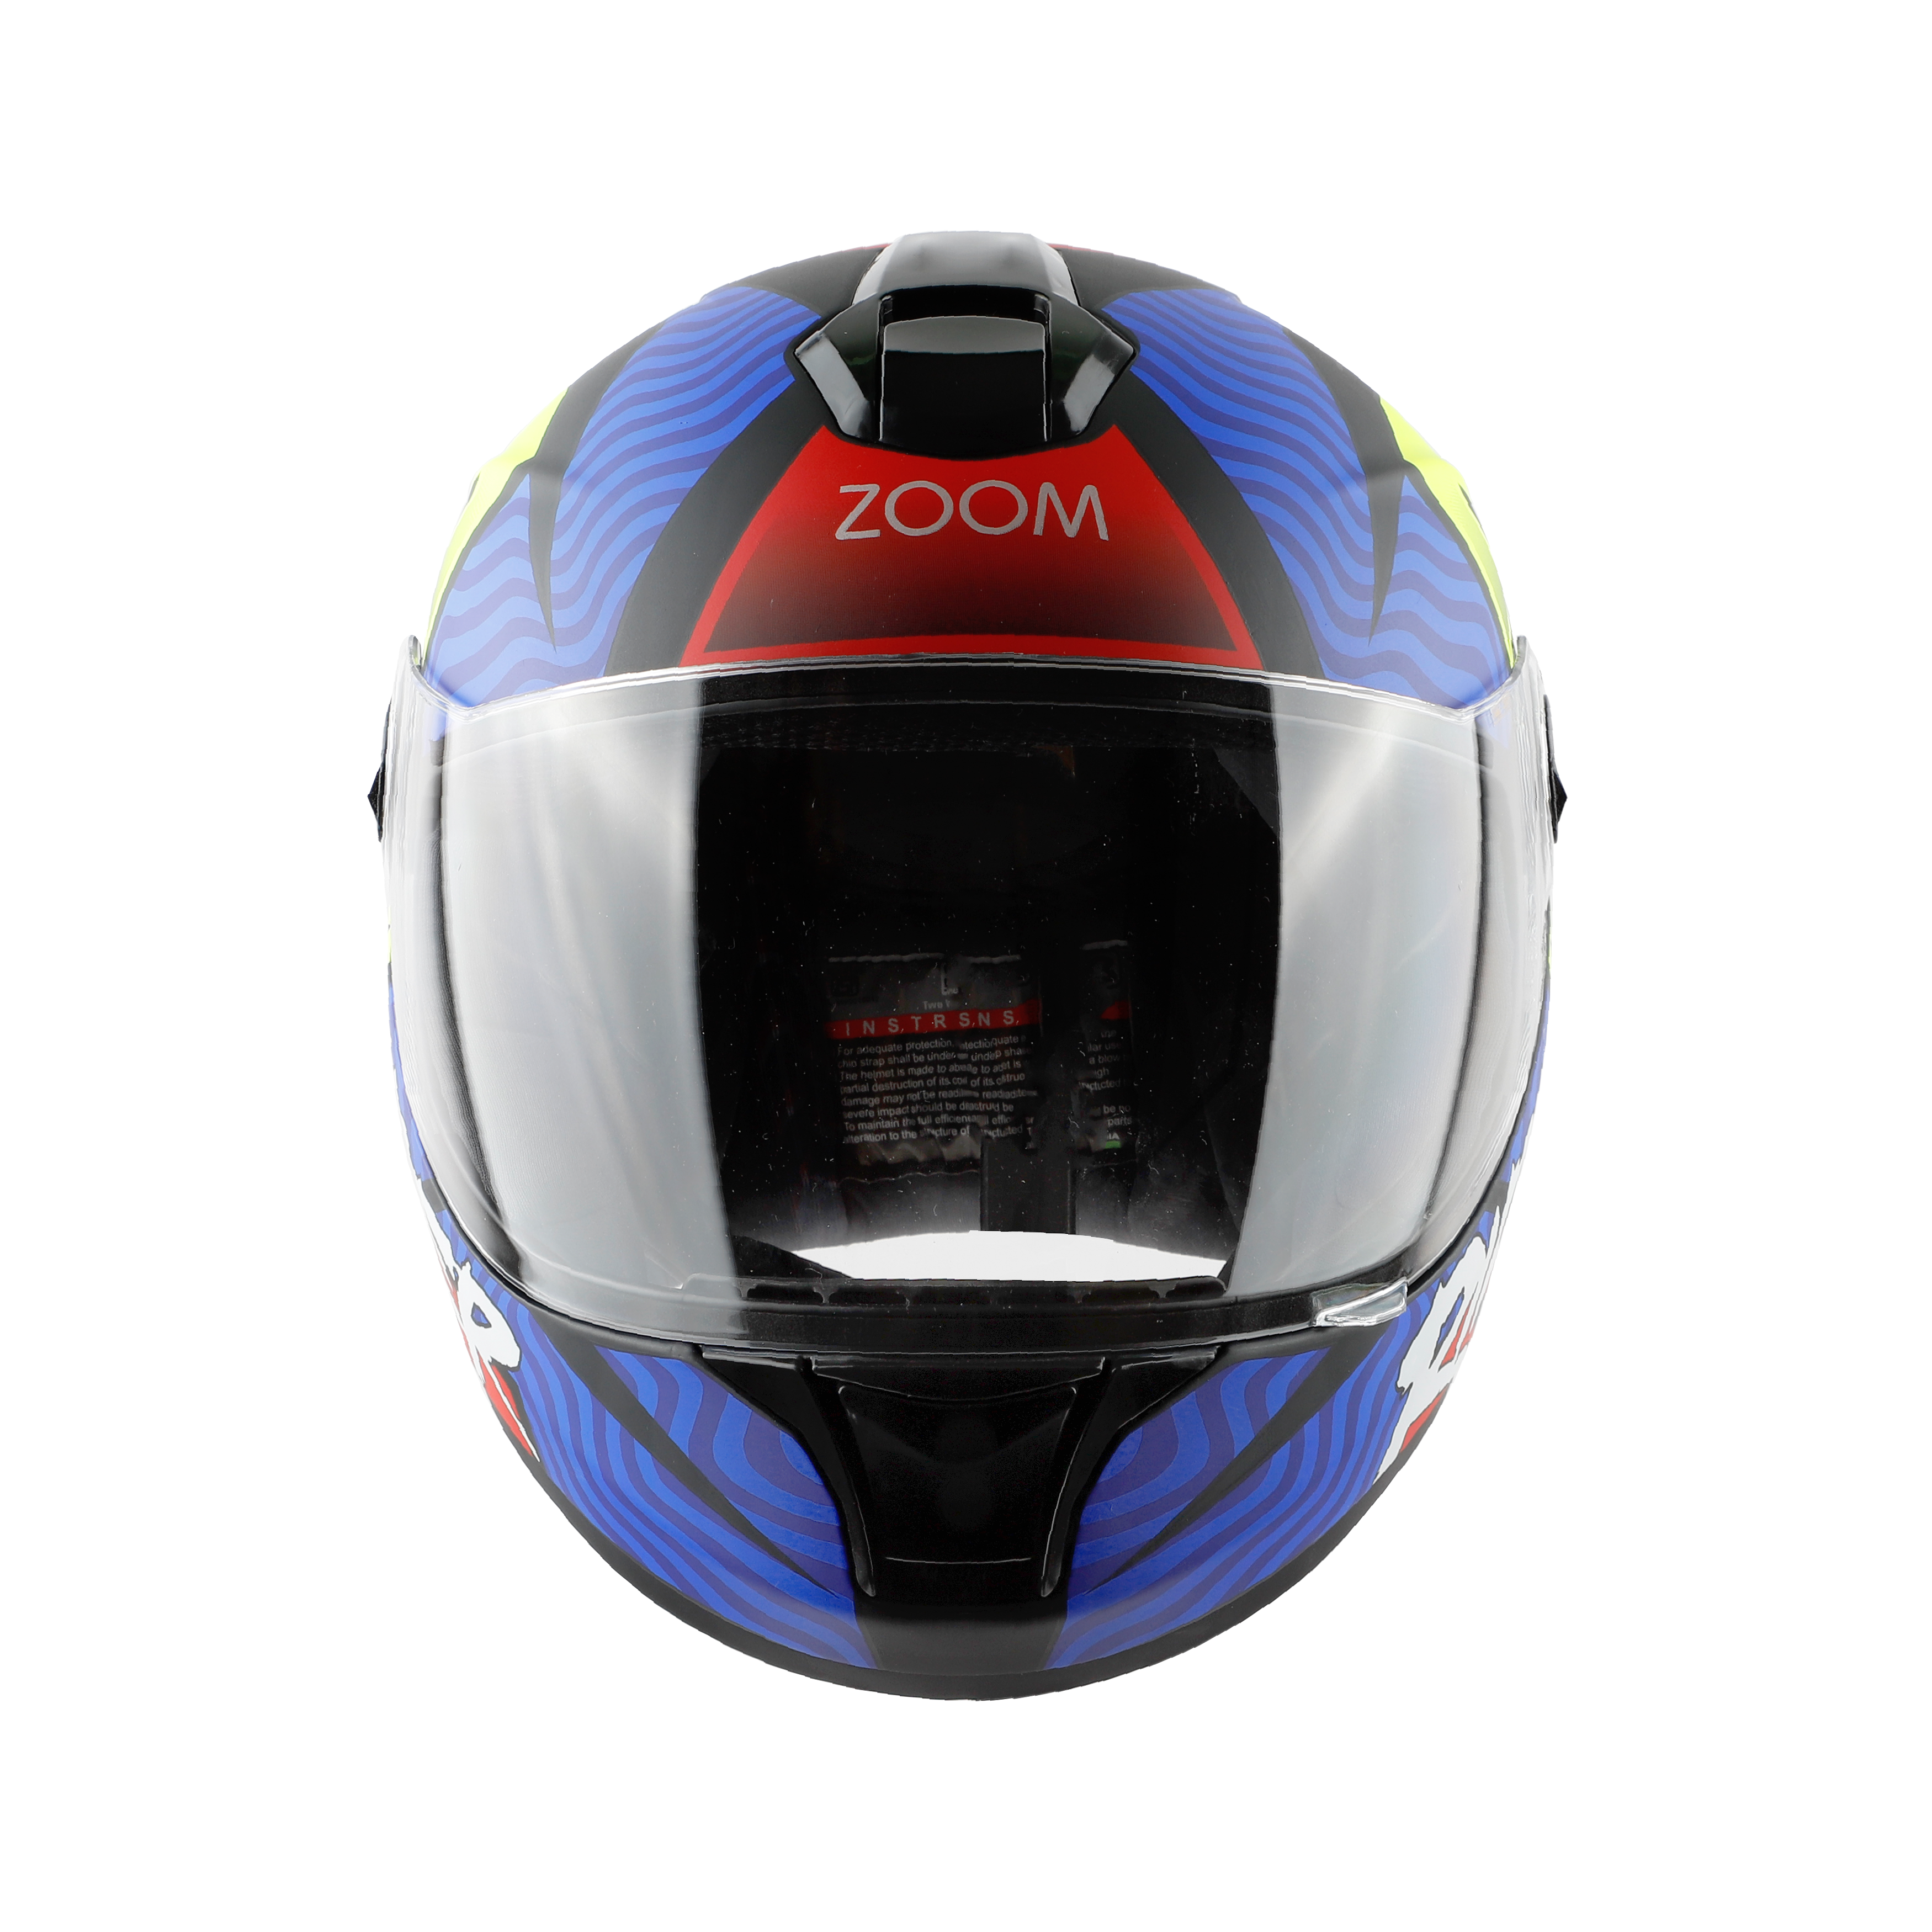 SBH-11 ZOOM RIDER GLOSSY BLUE WITH RED